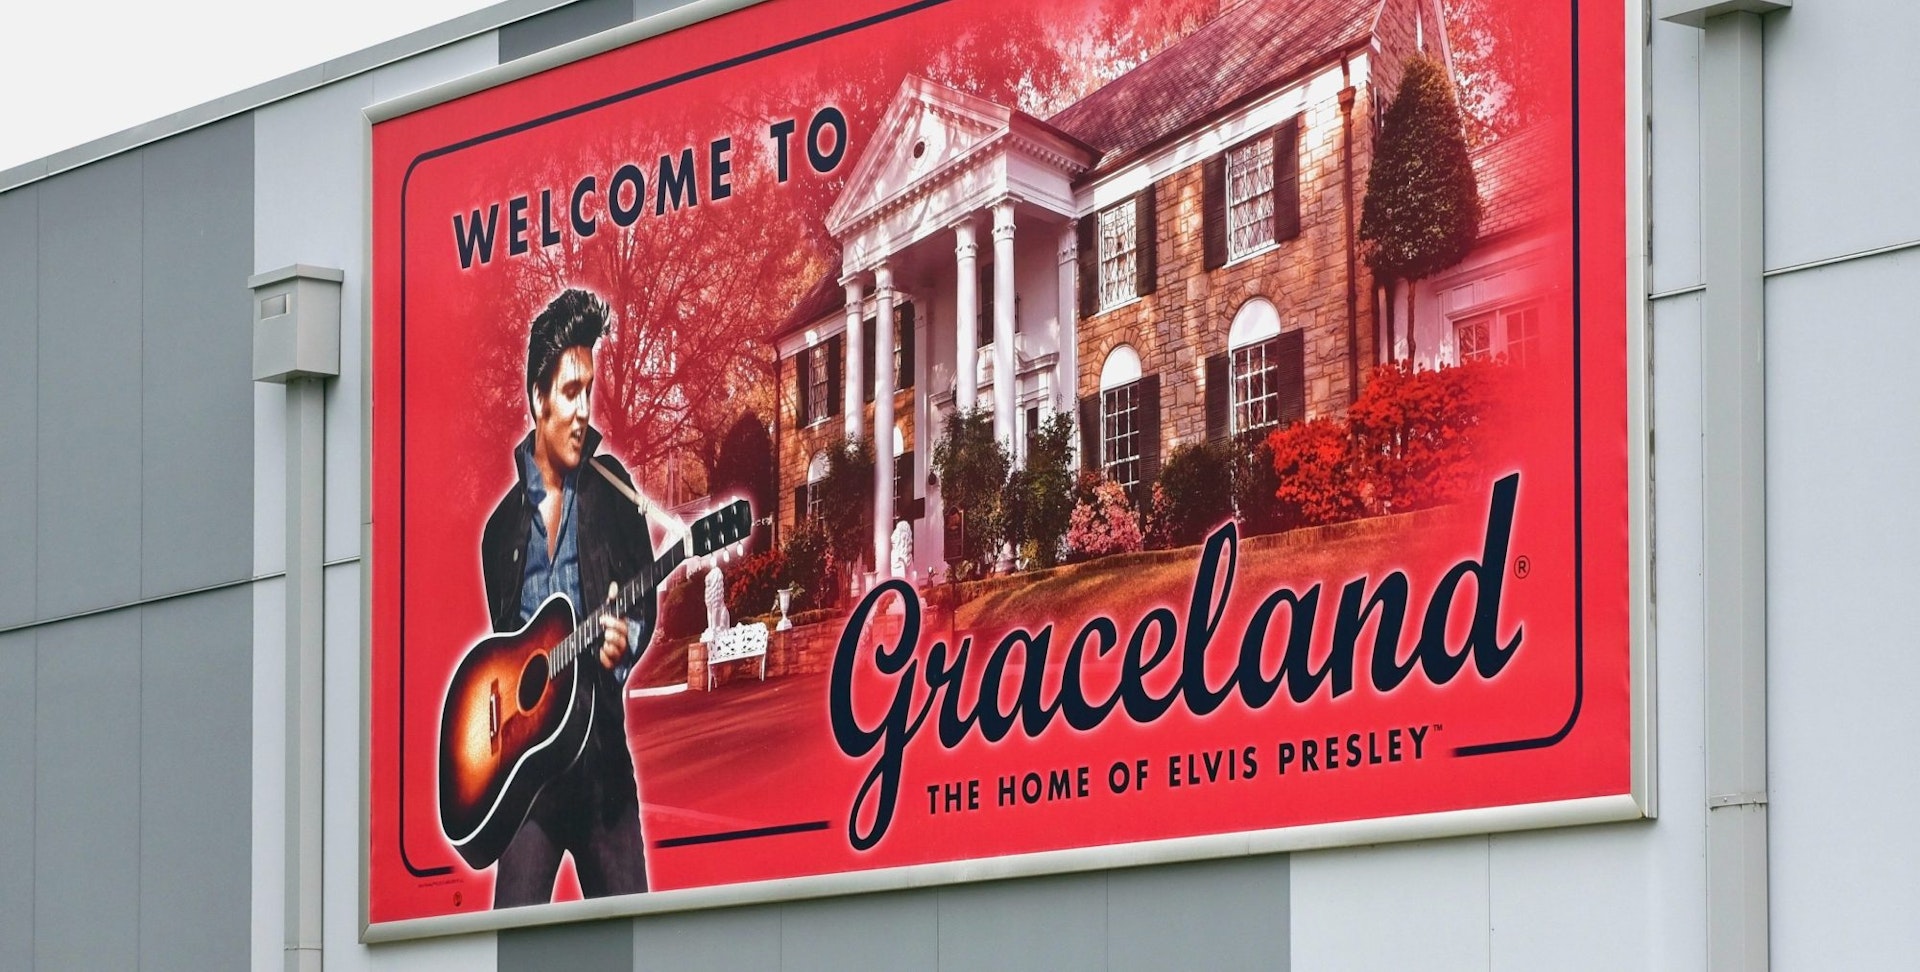 rance to the Graceland complex featuring sign of Elvis